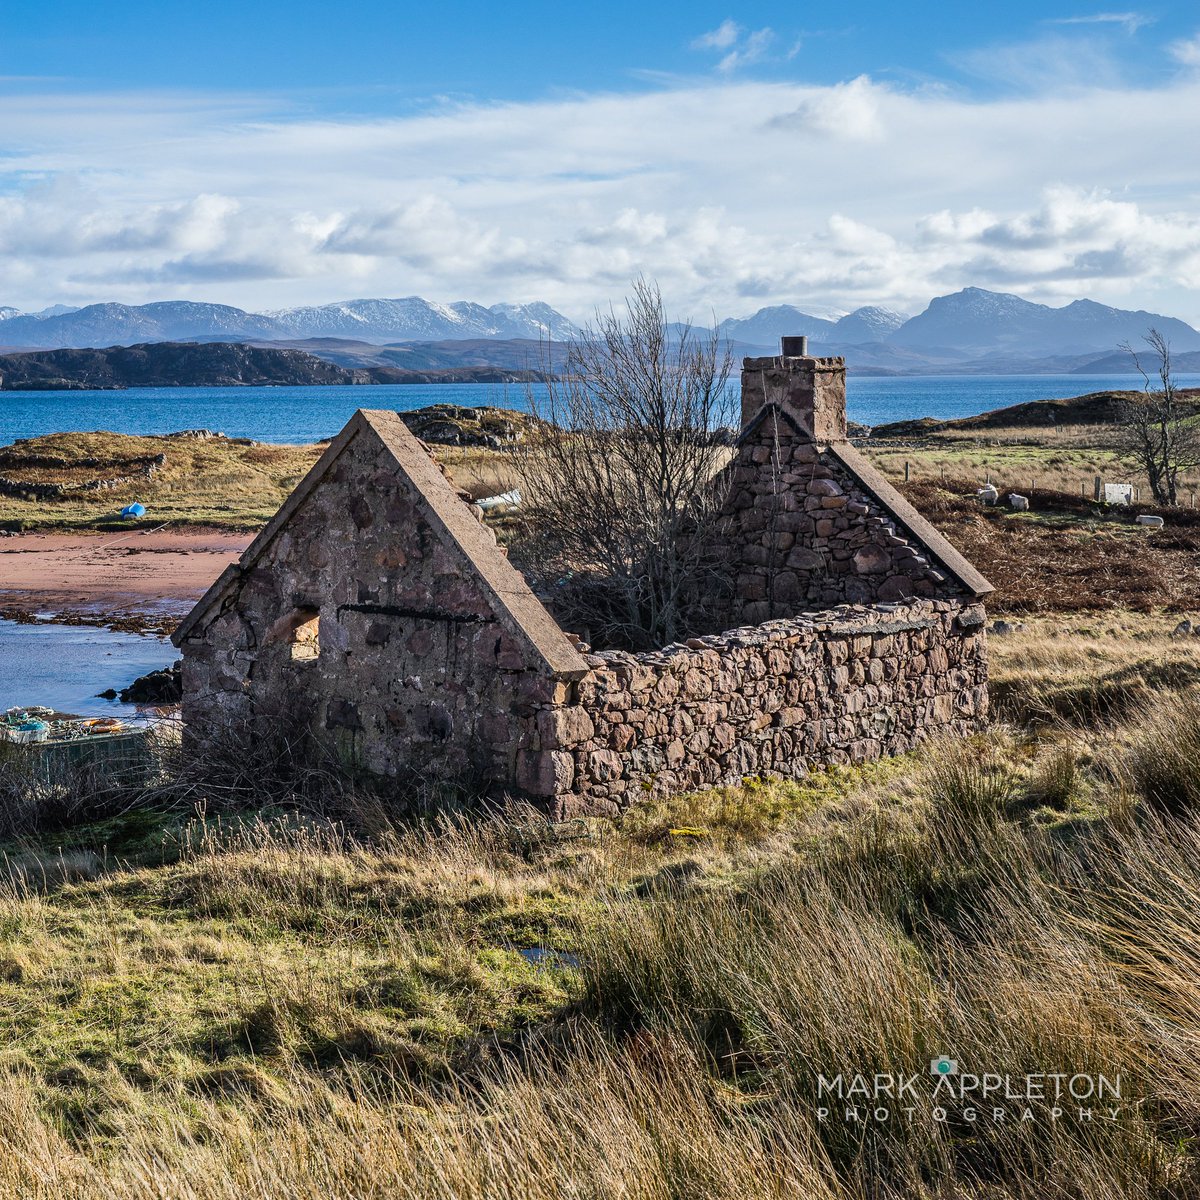 Looking across Loch Ewe towards the Fisherfield mountains. 

#westerross #lochewe #fisherfield #mountains #oldcrofthouse #crofthouse #landscapephotography #Scotland #Highland #Photography #VisitScotland